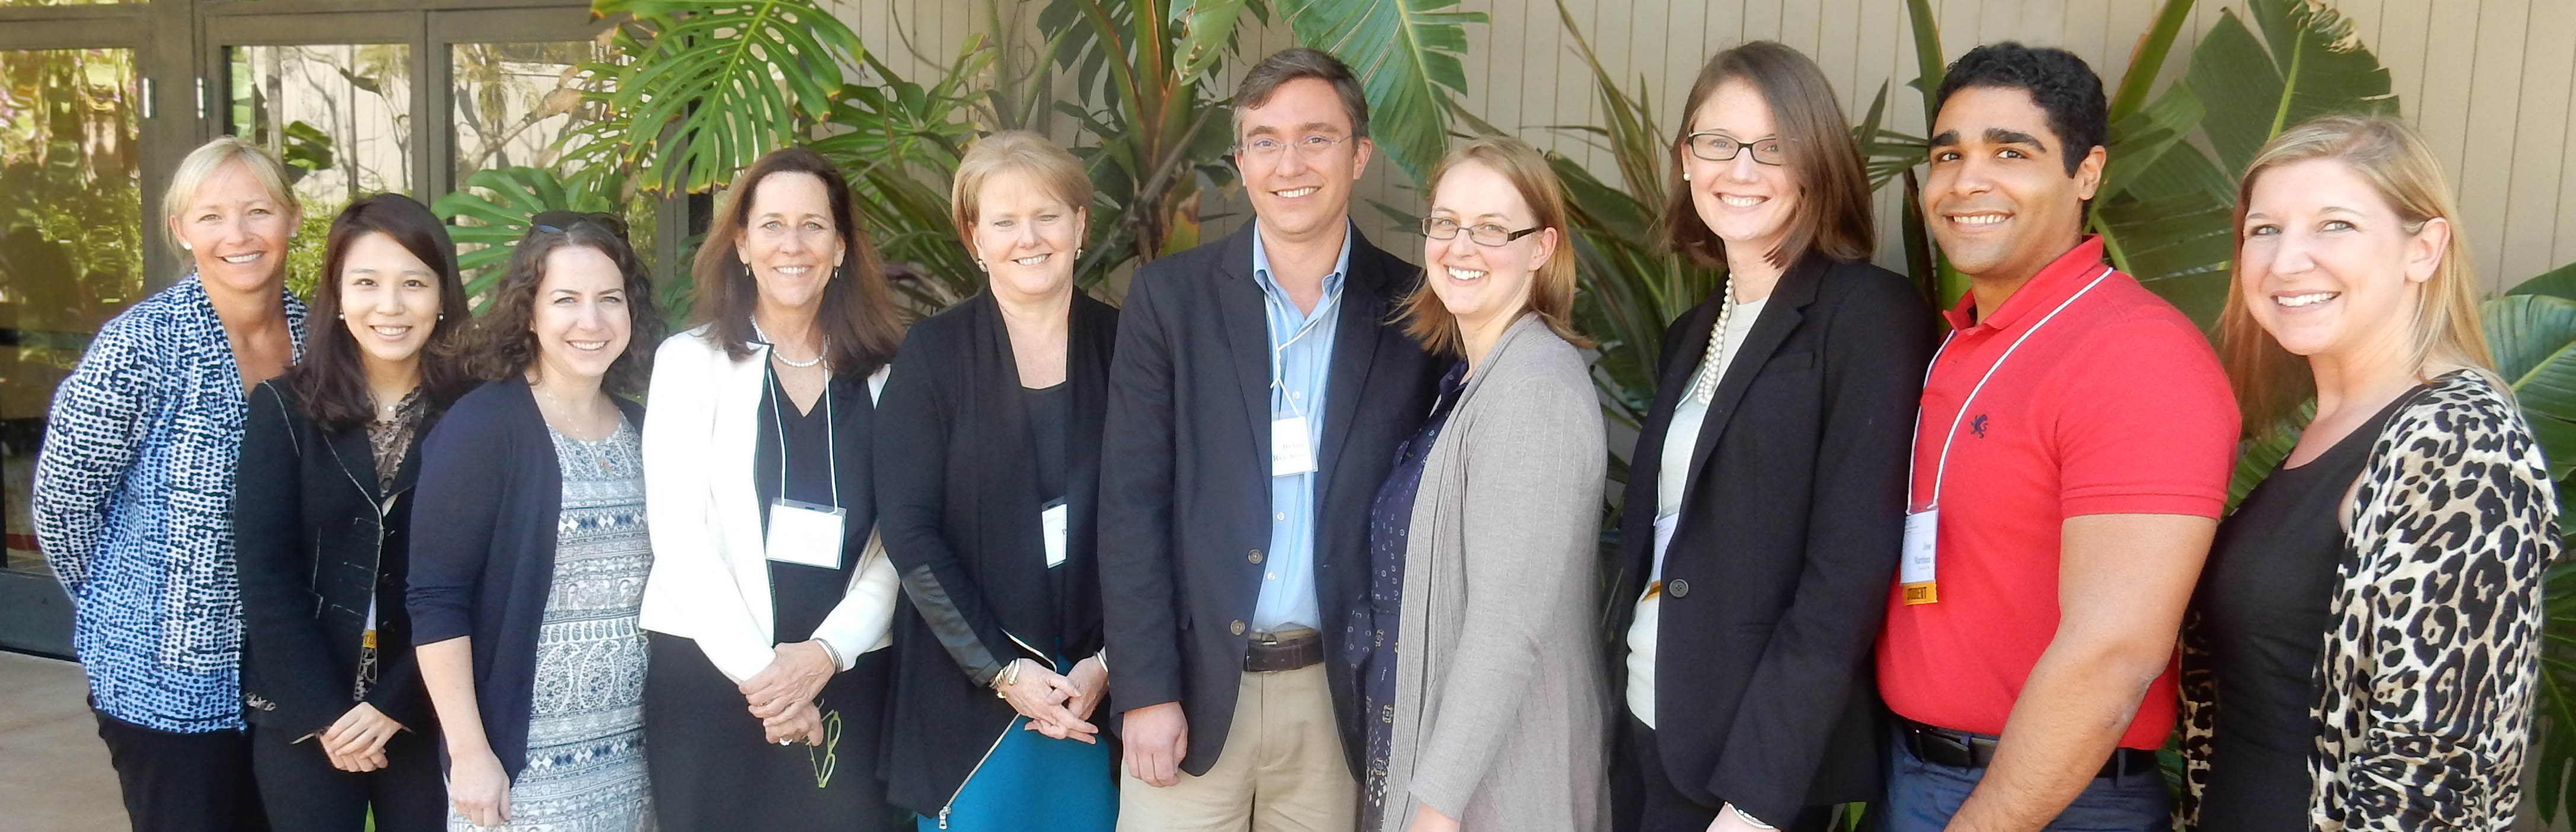 UF Scholars Contribute to National Meeting in Research Innovations in Early Intervention